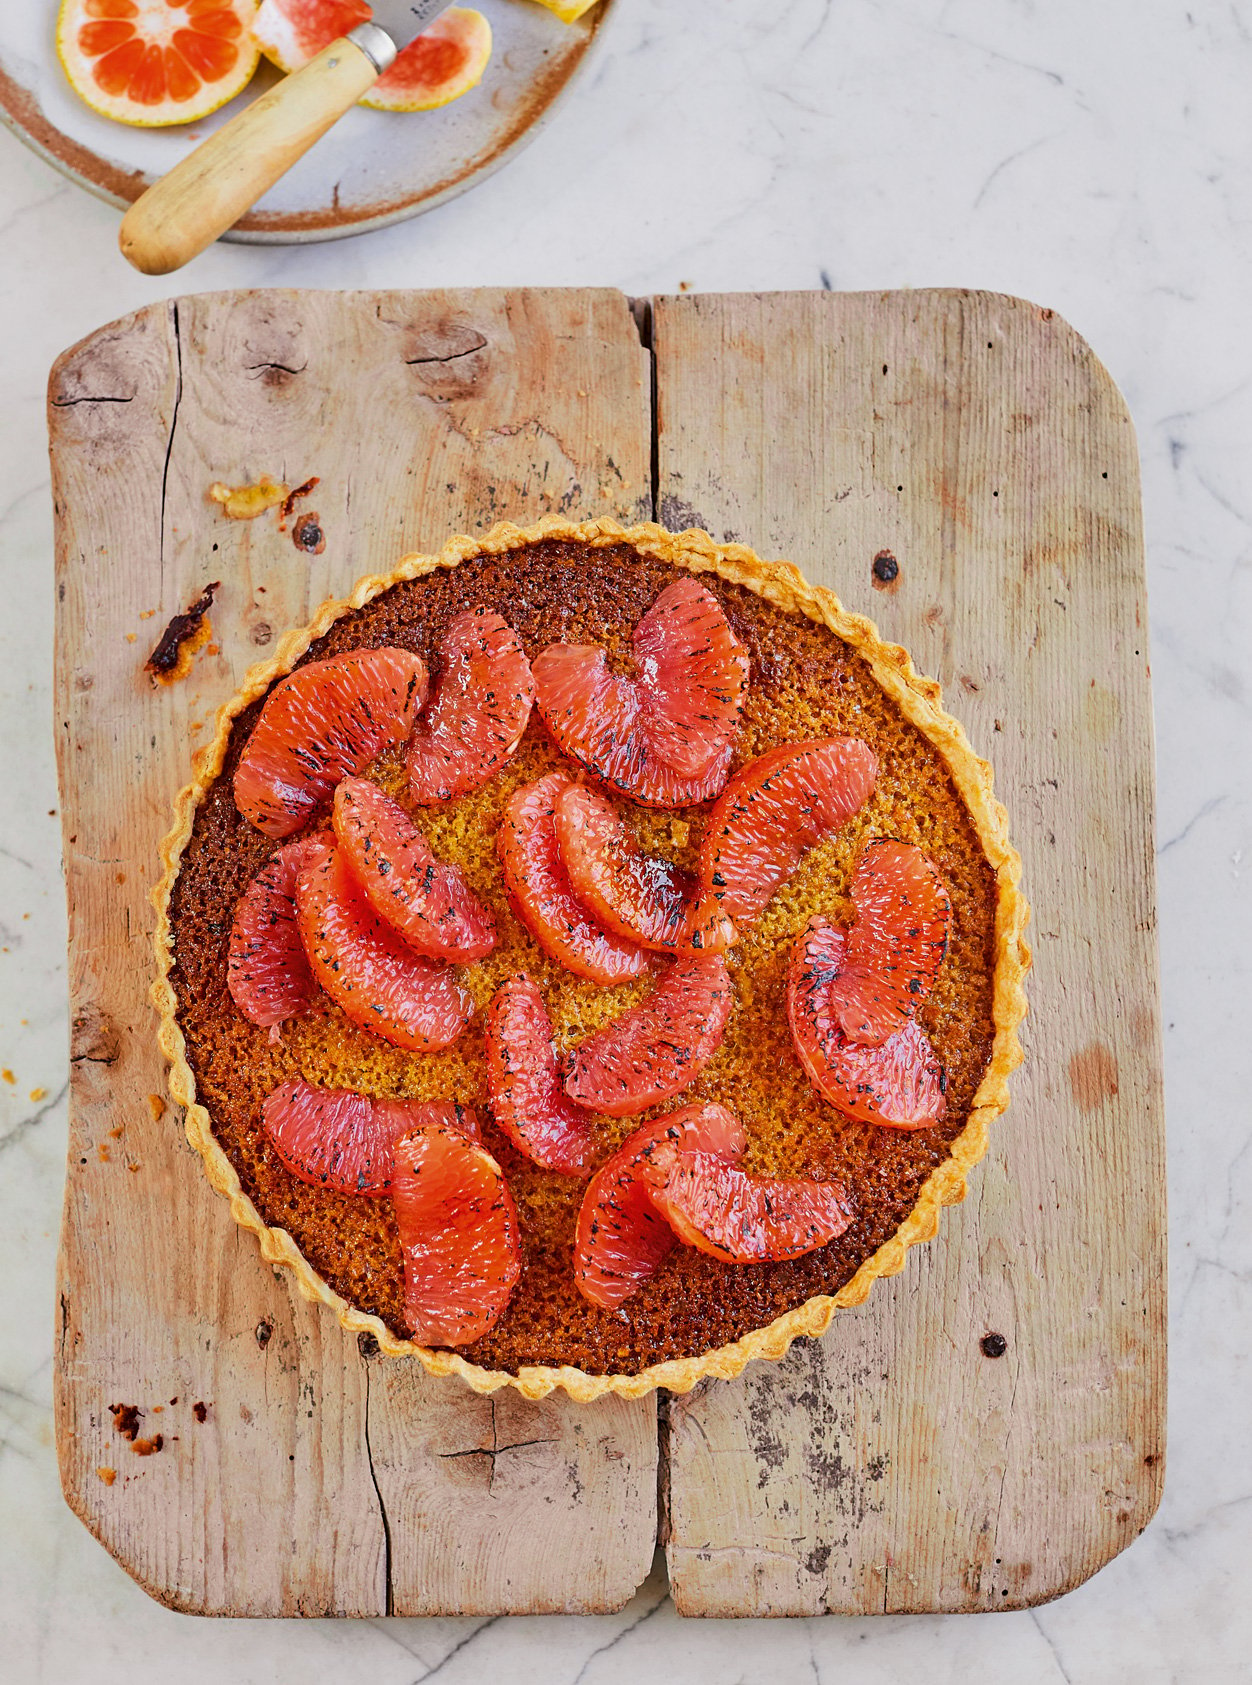 Prue Leith's Grapefruit Treacle Tart on a wooden board